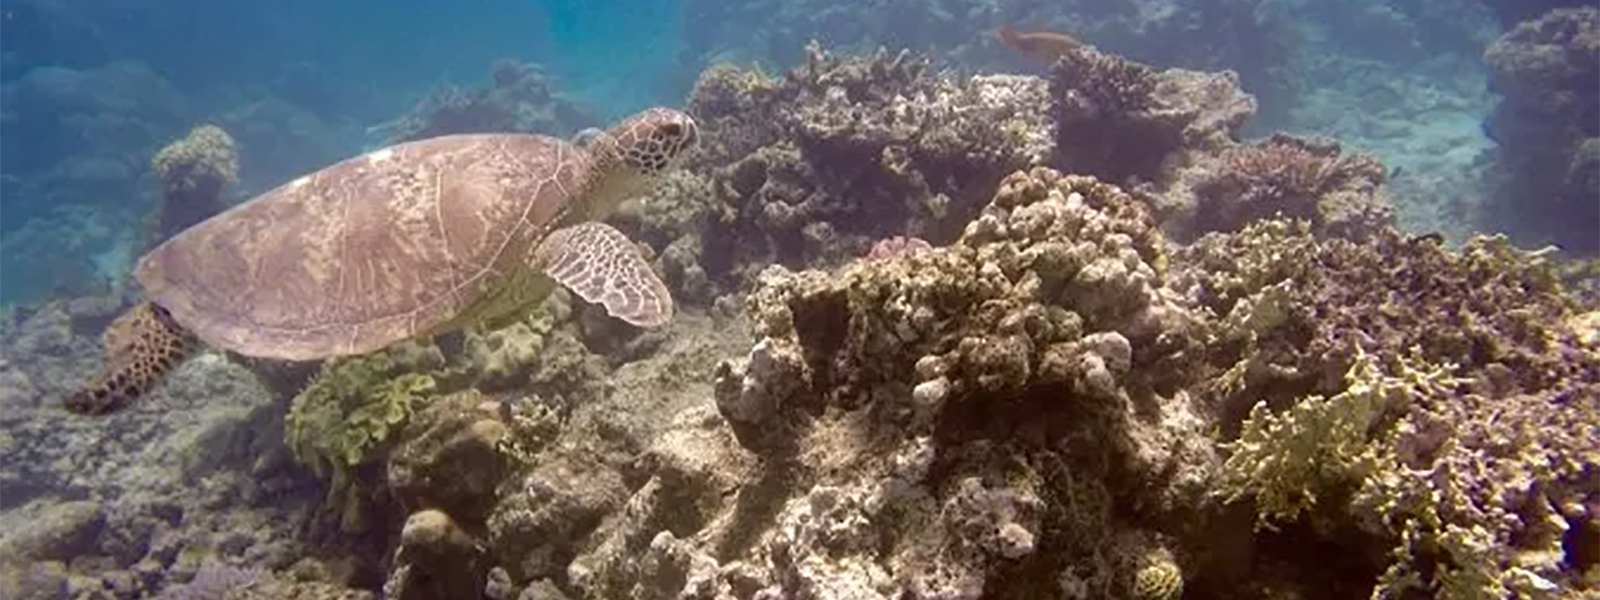 Turtle swimming on coral reef